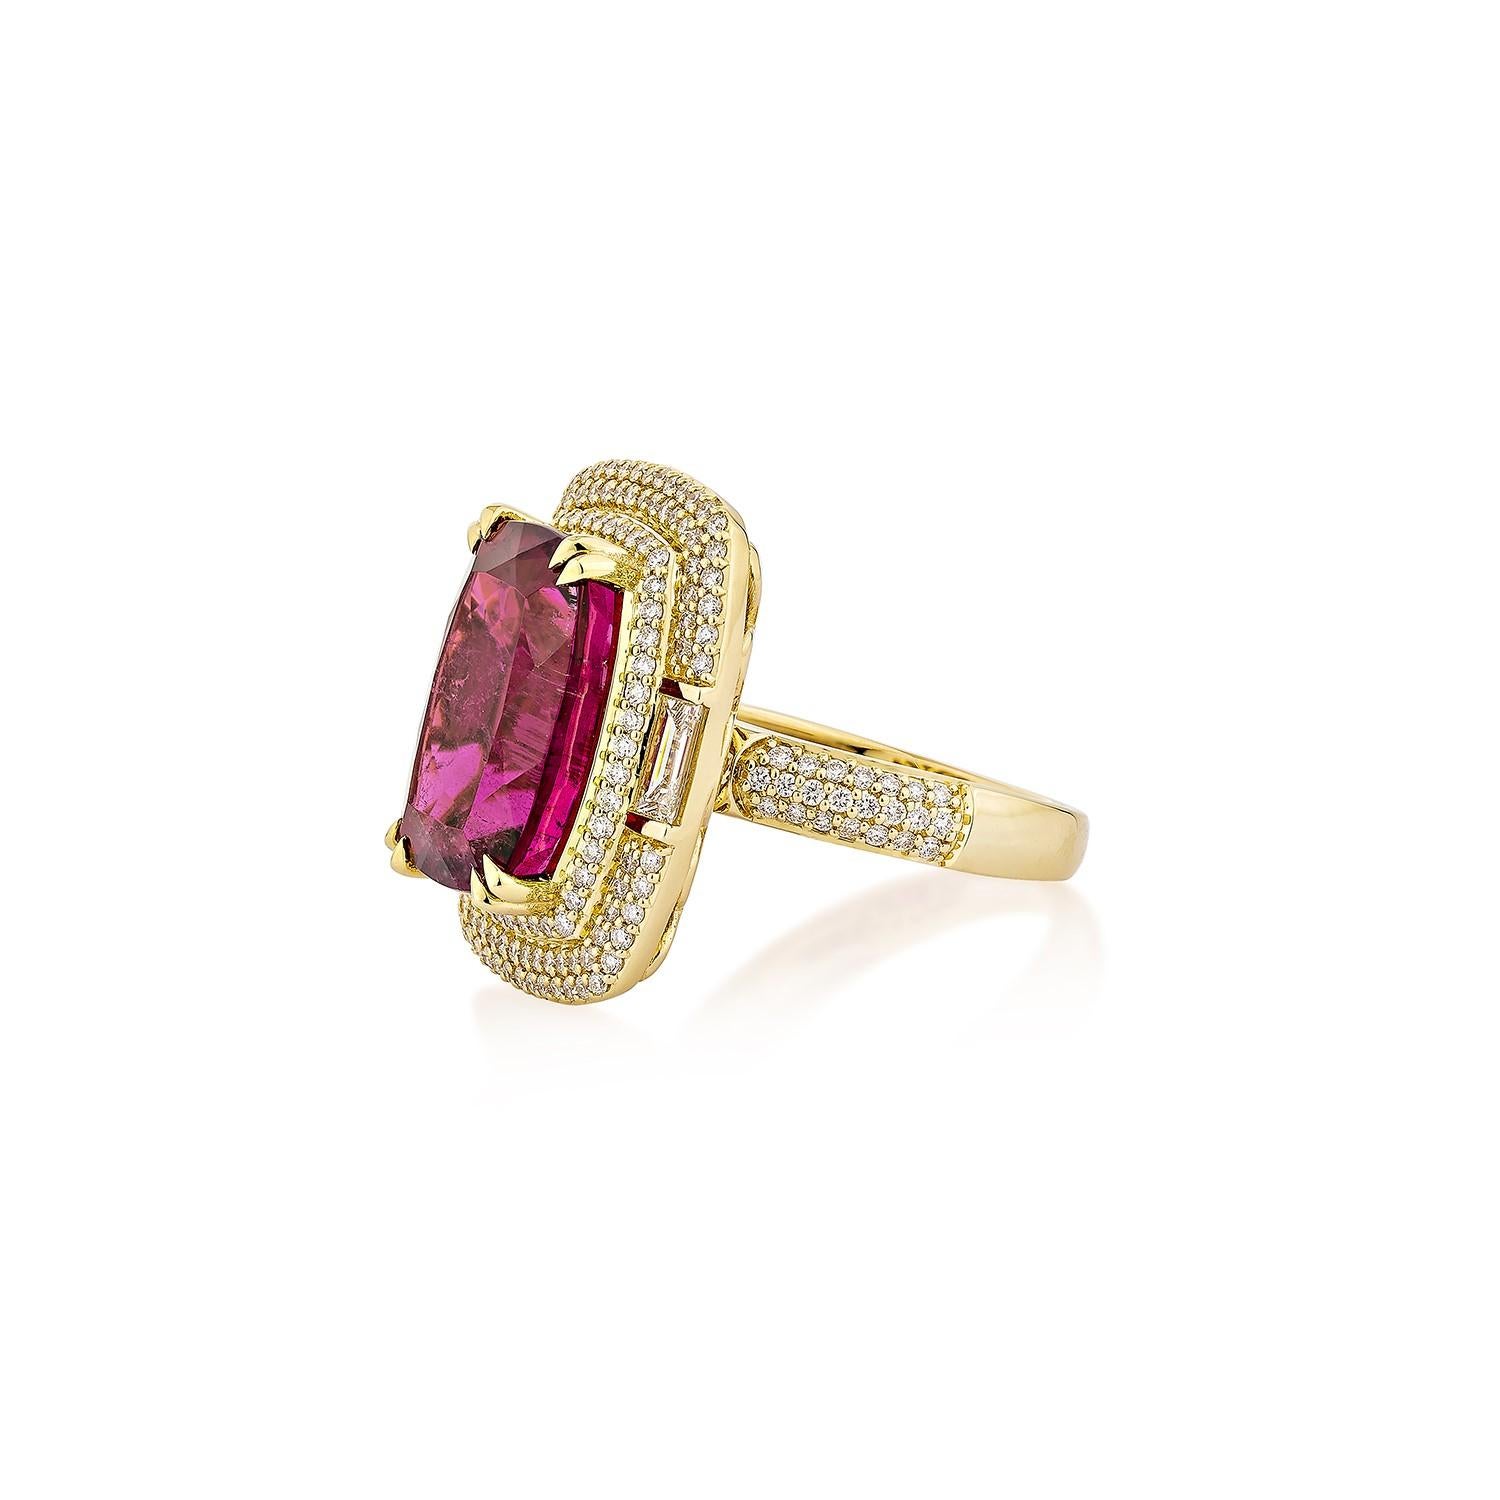 Cushion Cut 10.56 Carat Rubellite Fancy Ring in 18Karat Yellow Gold with White Diamond. For Sale